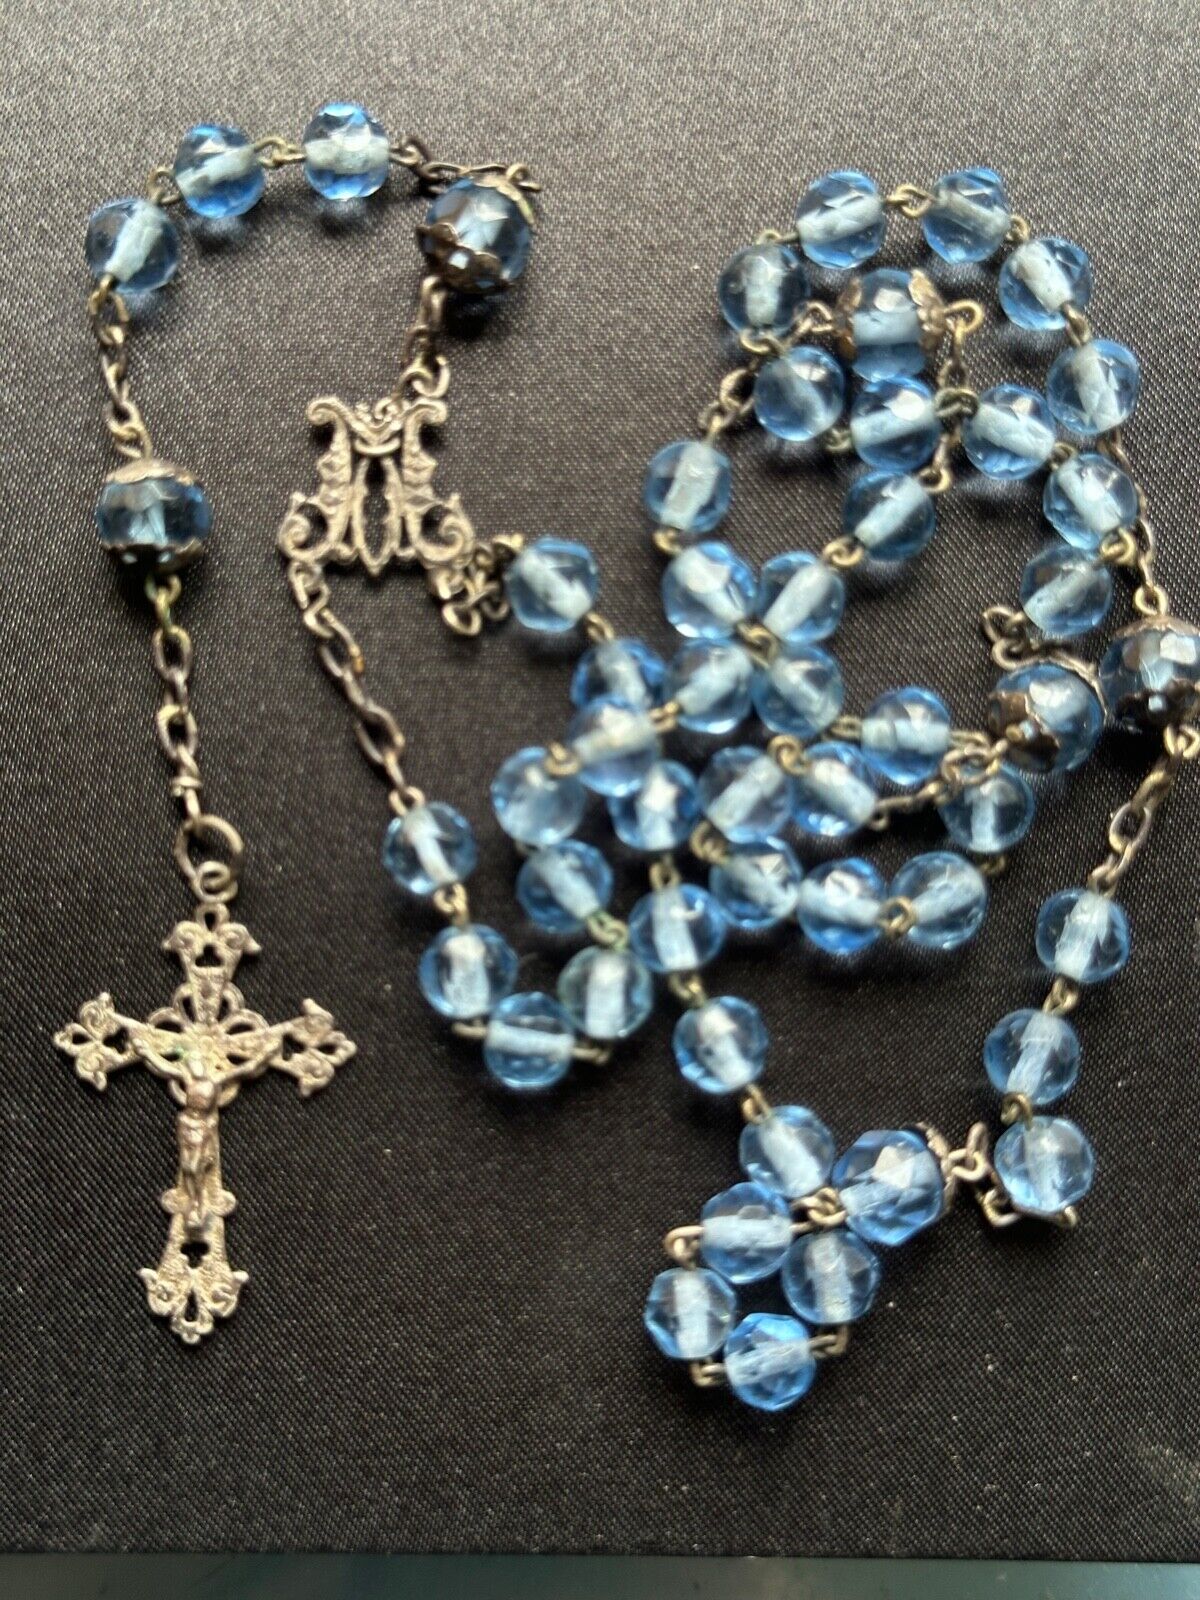 Beautiful Antique Blue Faceted Glass beads Chapelet with silver Cross 29